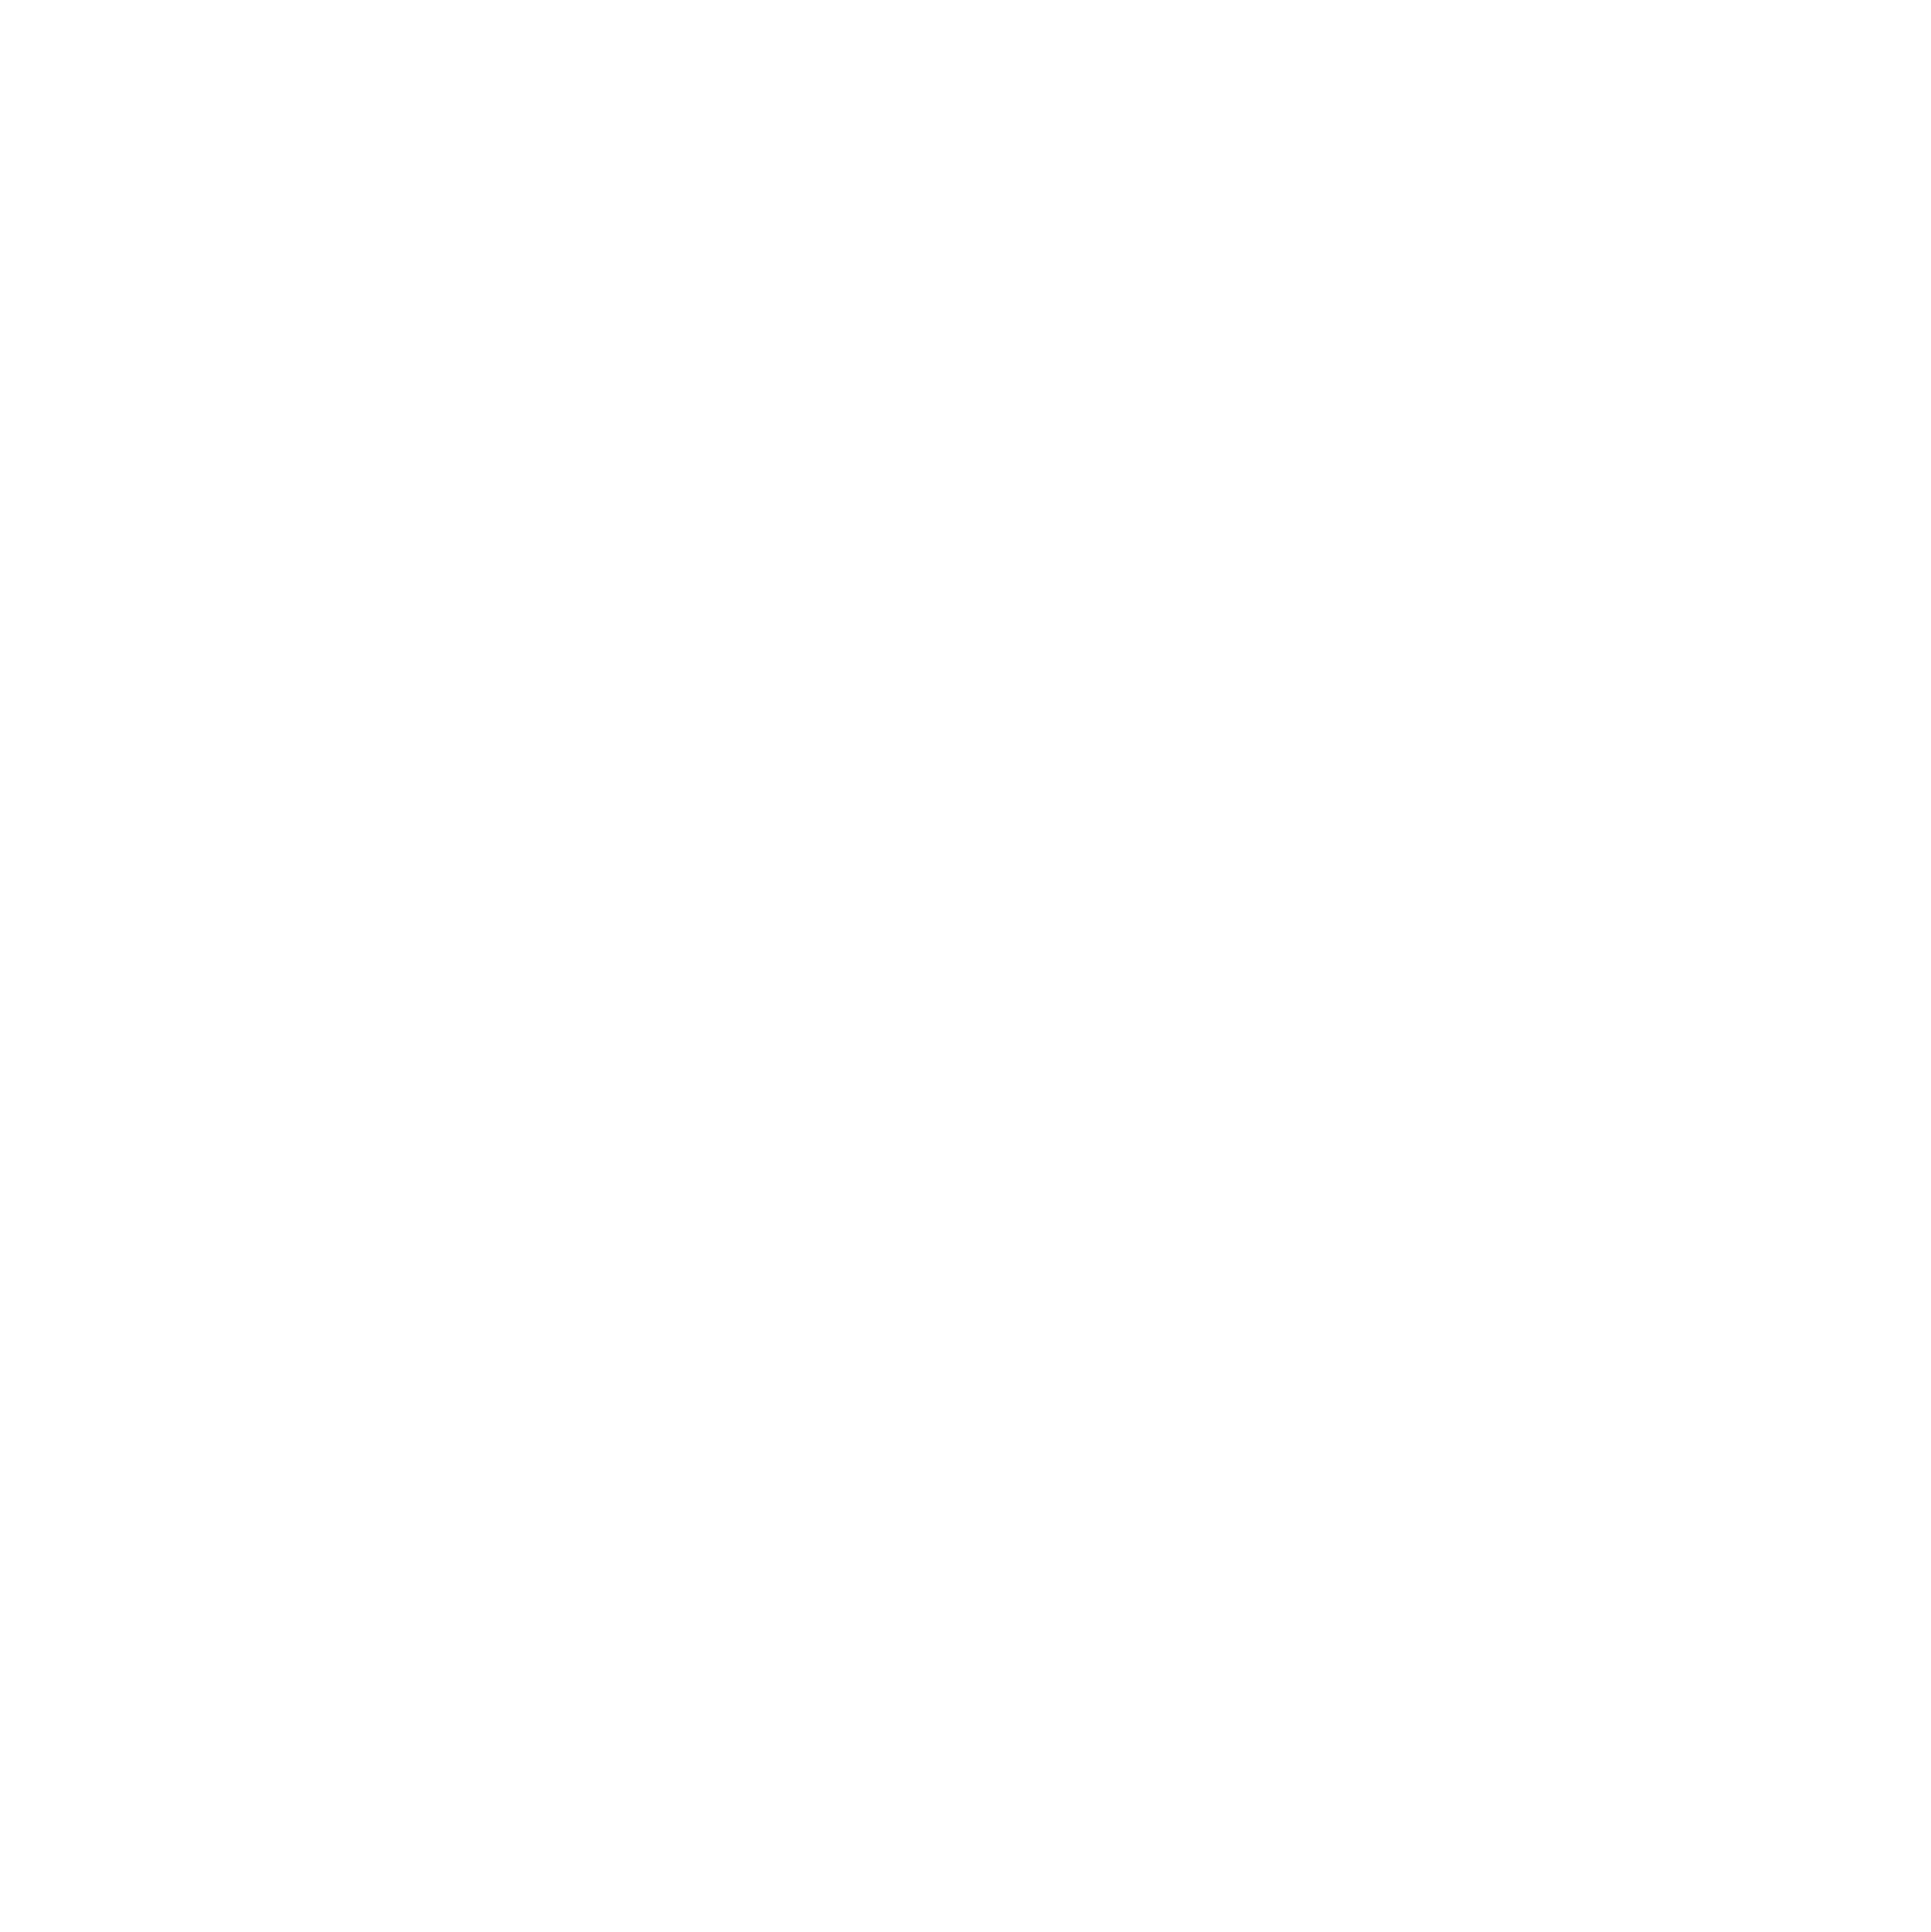 wrench tool icon